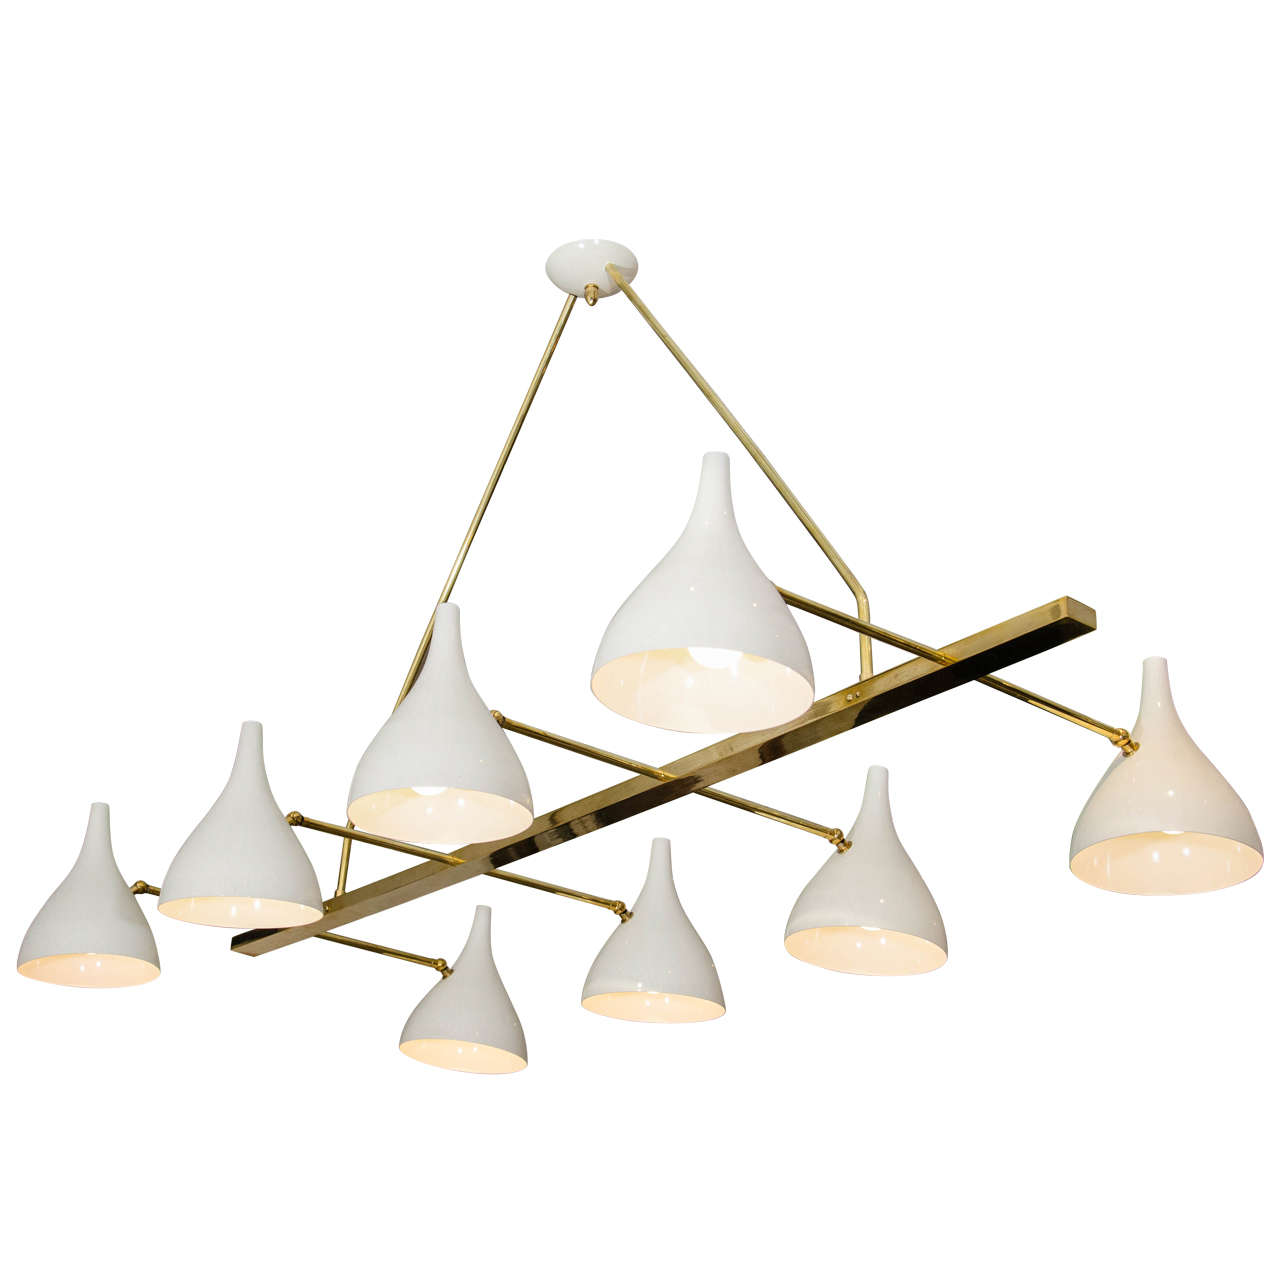 Off White Tole Chandelier with Eight Shades, Italy circa 1960s